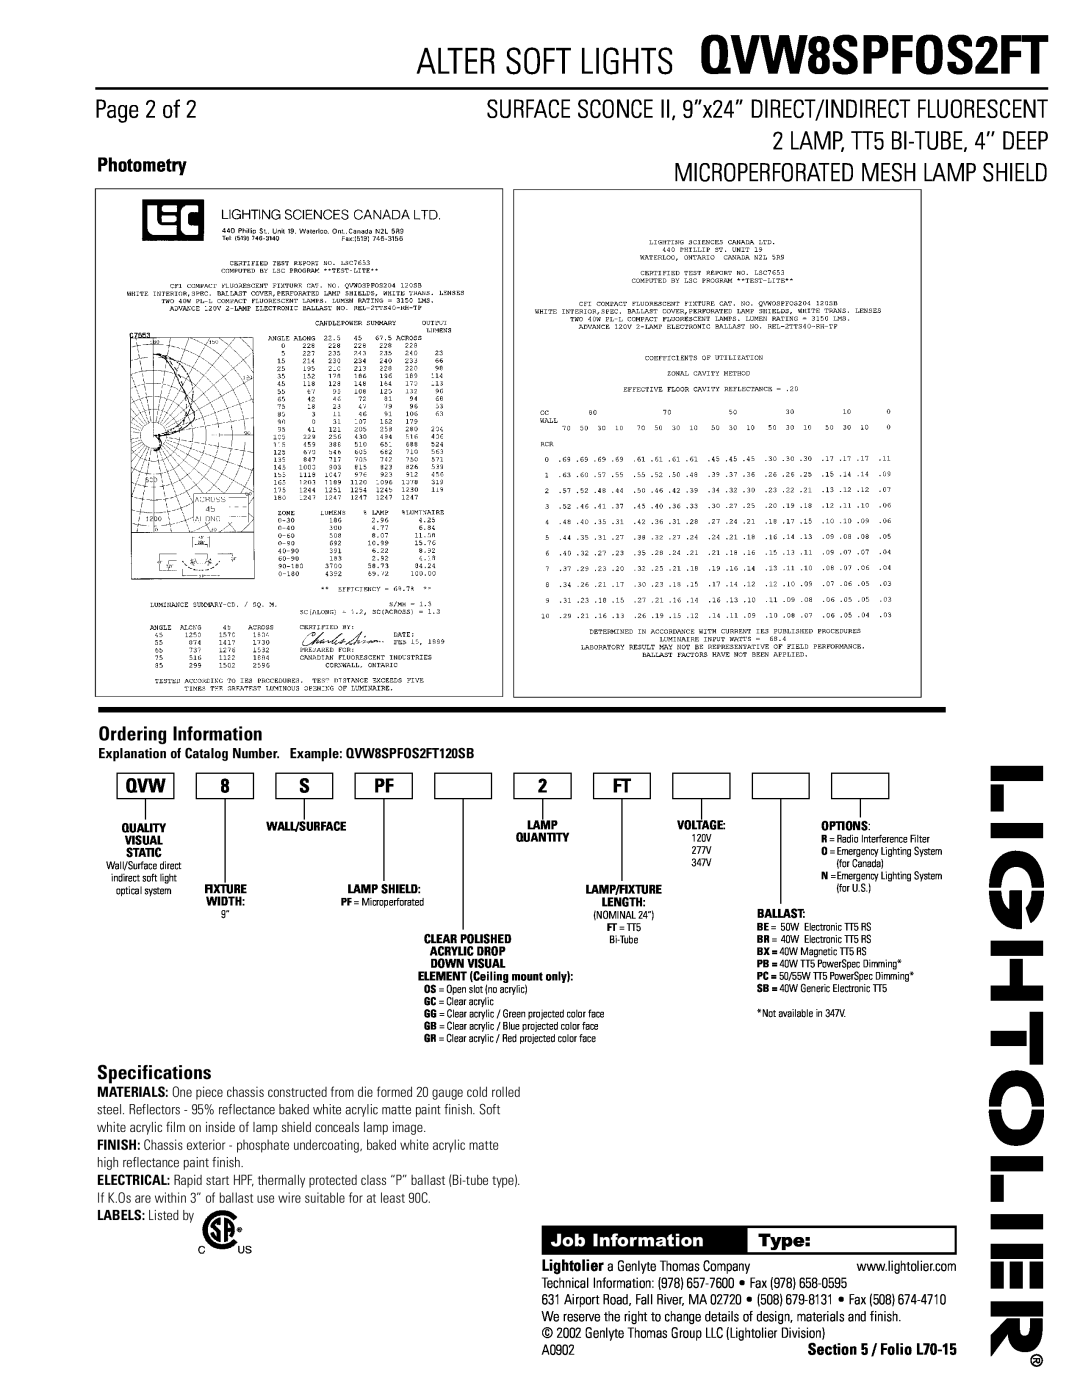 Lightolier QVW8SPFOS2FT Page 2 of, Photometry, Ordering Information, Specifications, LABELS Listed by, Quality, Lamp, Type 